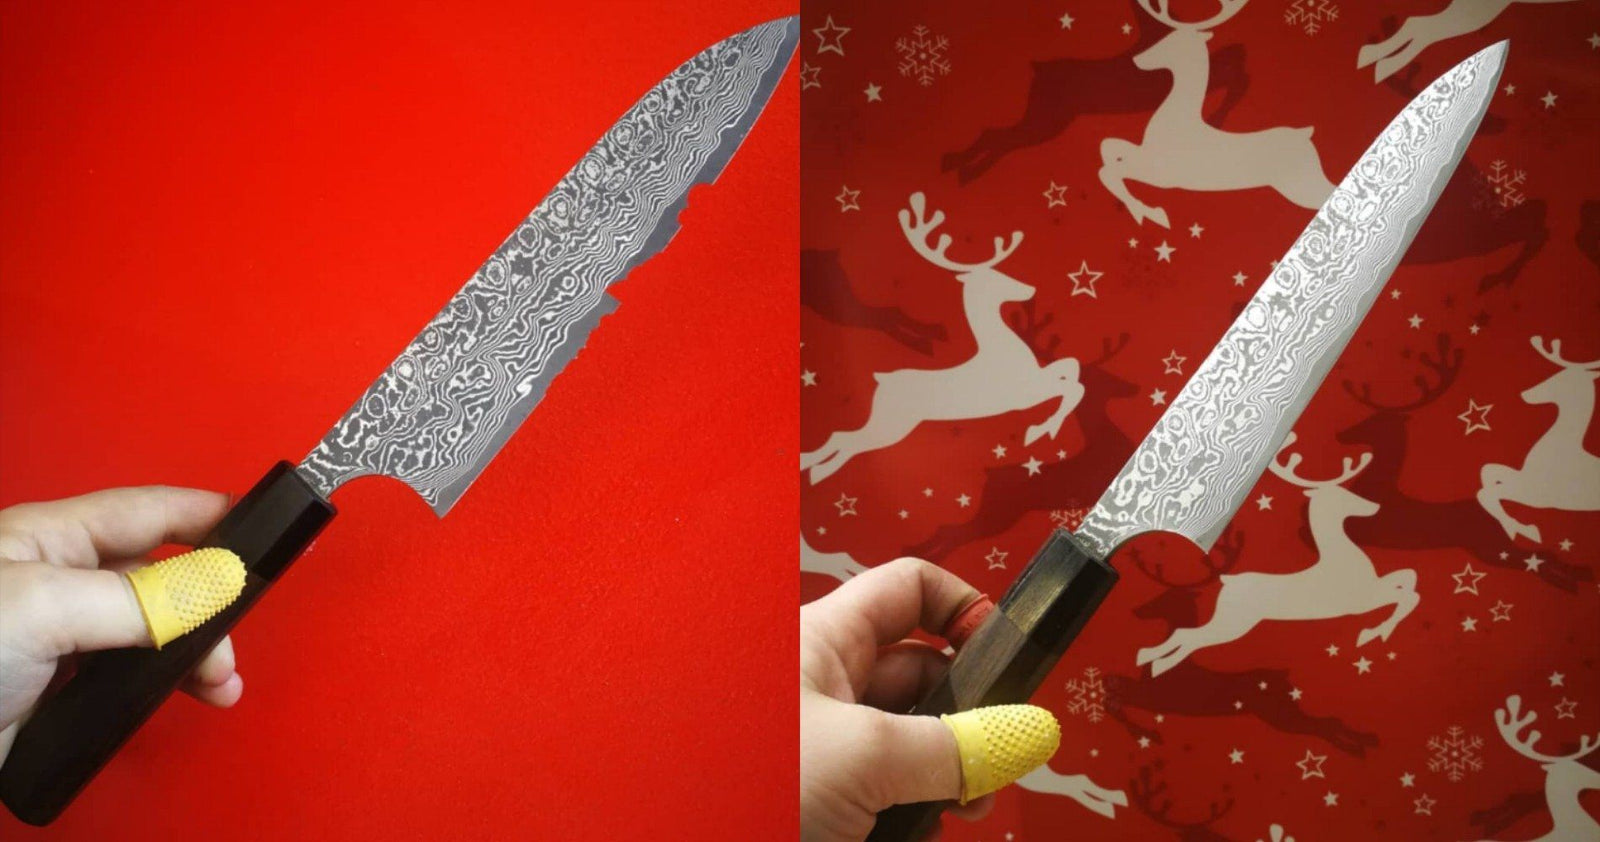 Faberware Professional 5 Ceramic Utility Kitchen Knife With Blade Cover  Gaurd